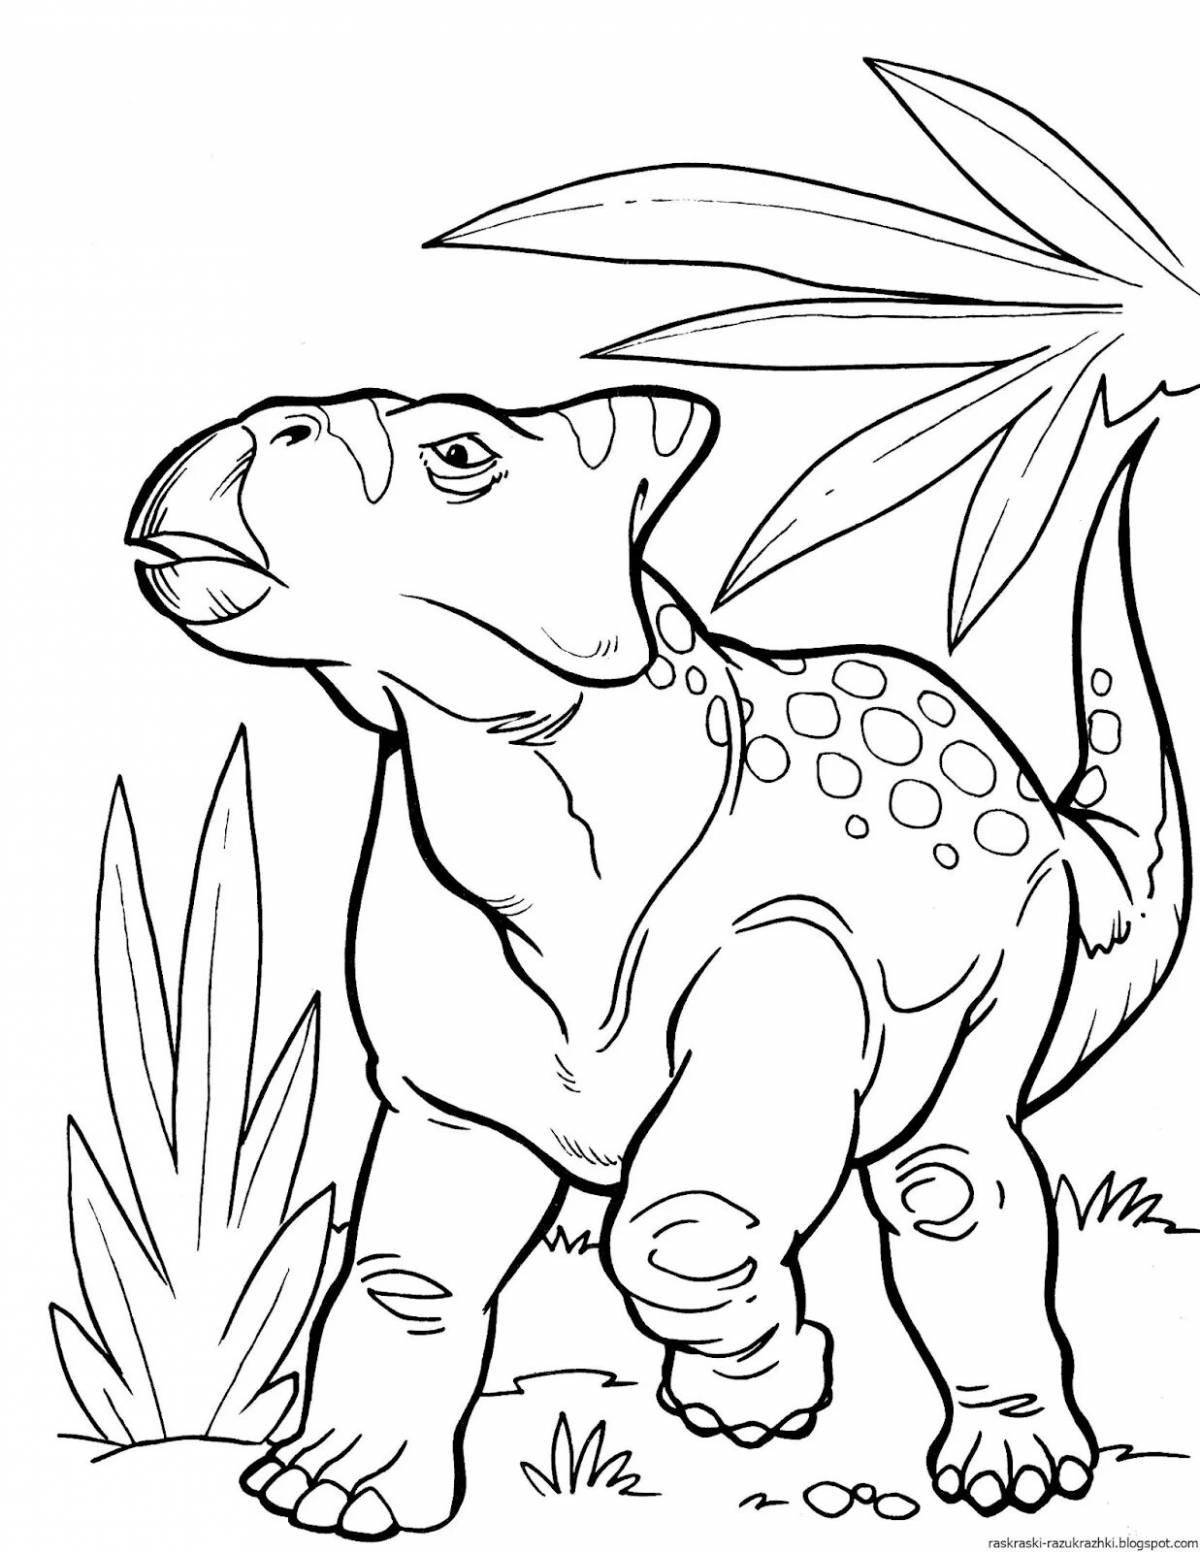 Colored dinosaurs coloring for children 5 years old